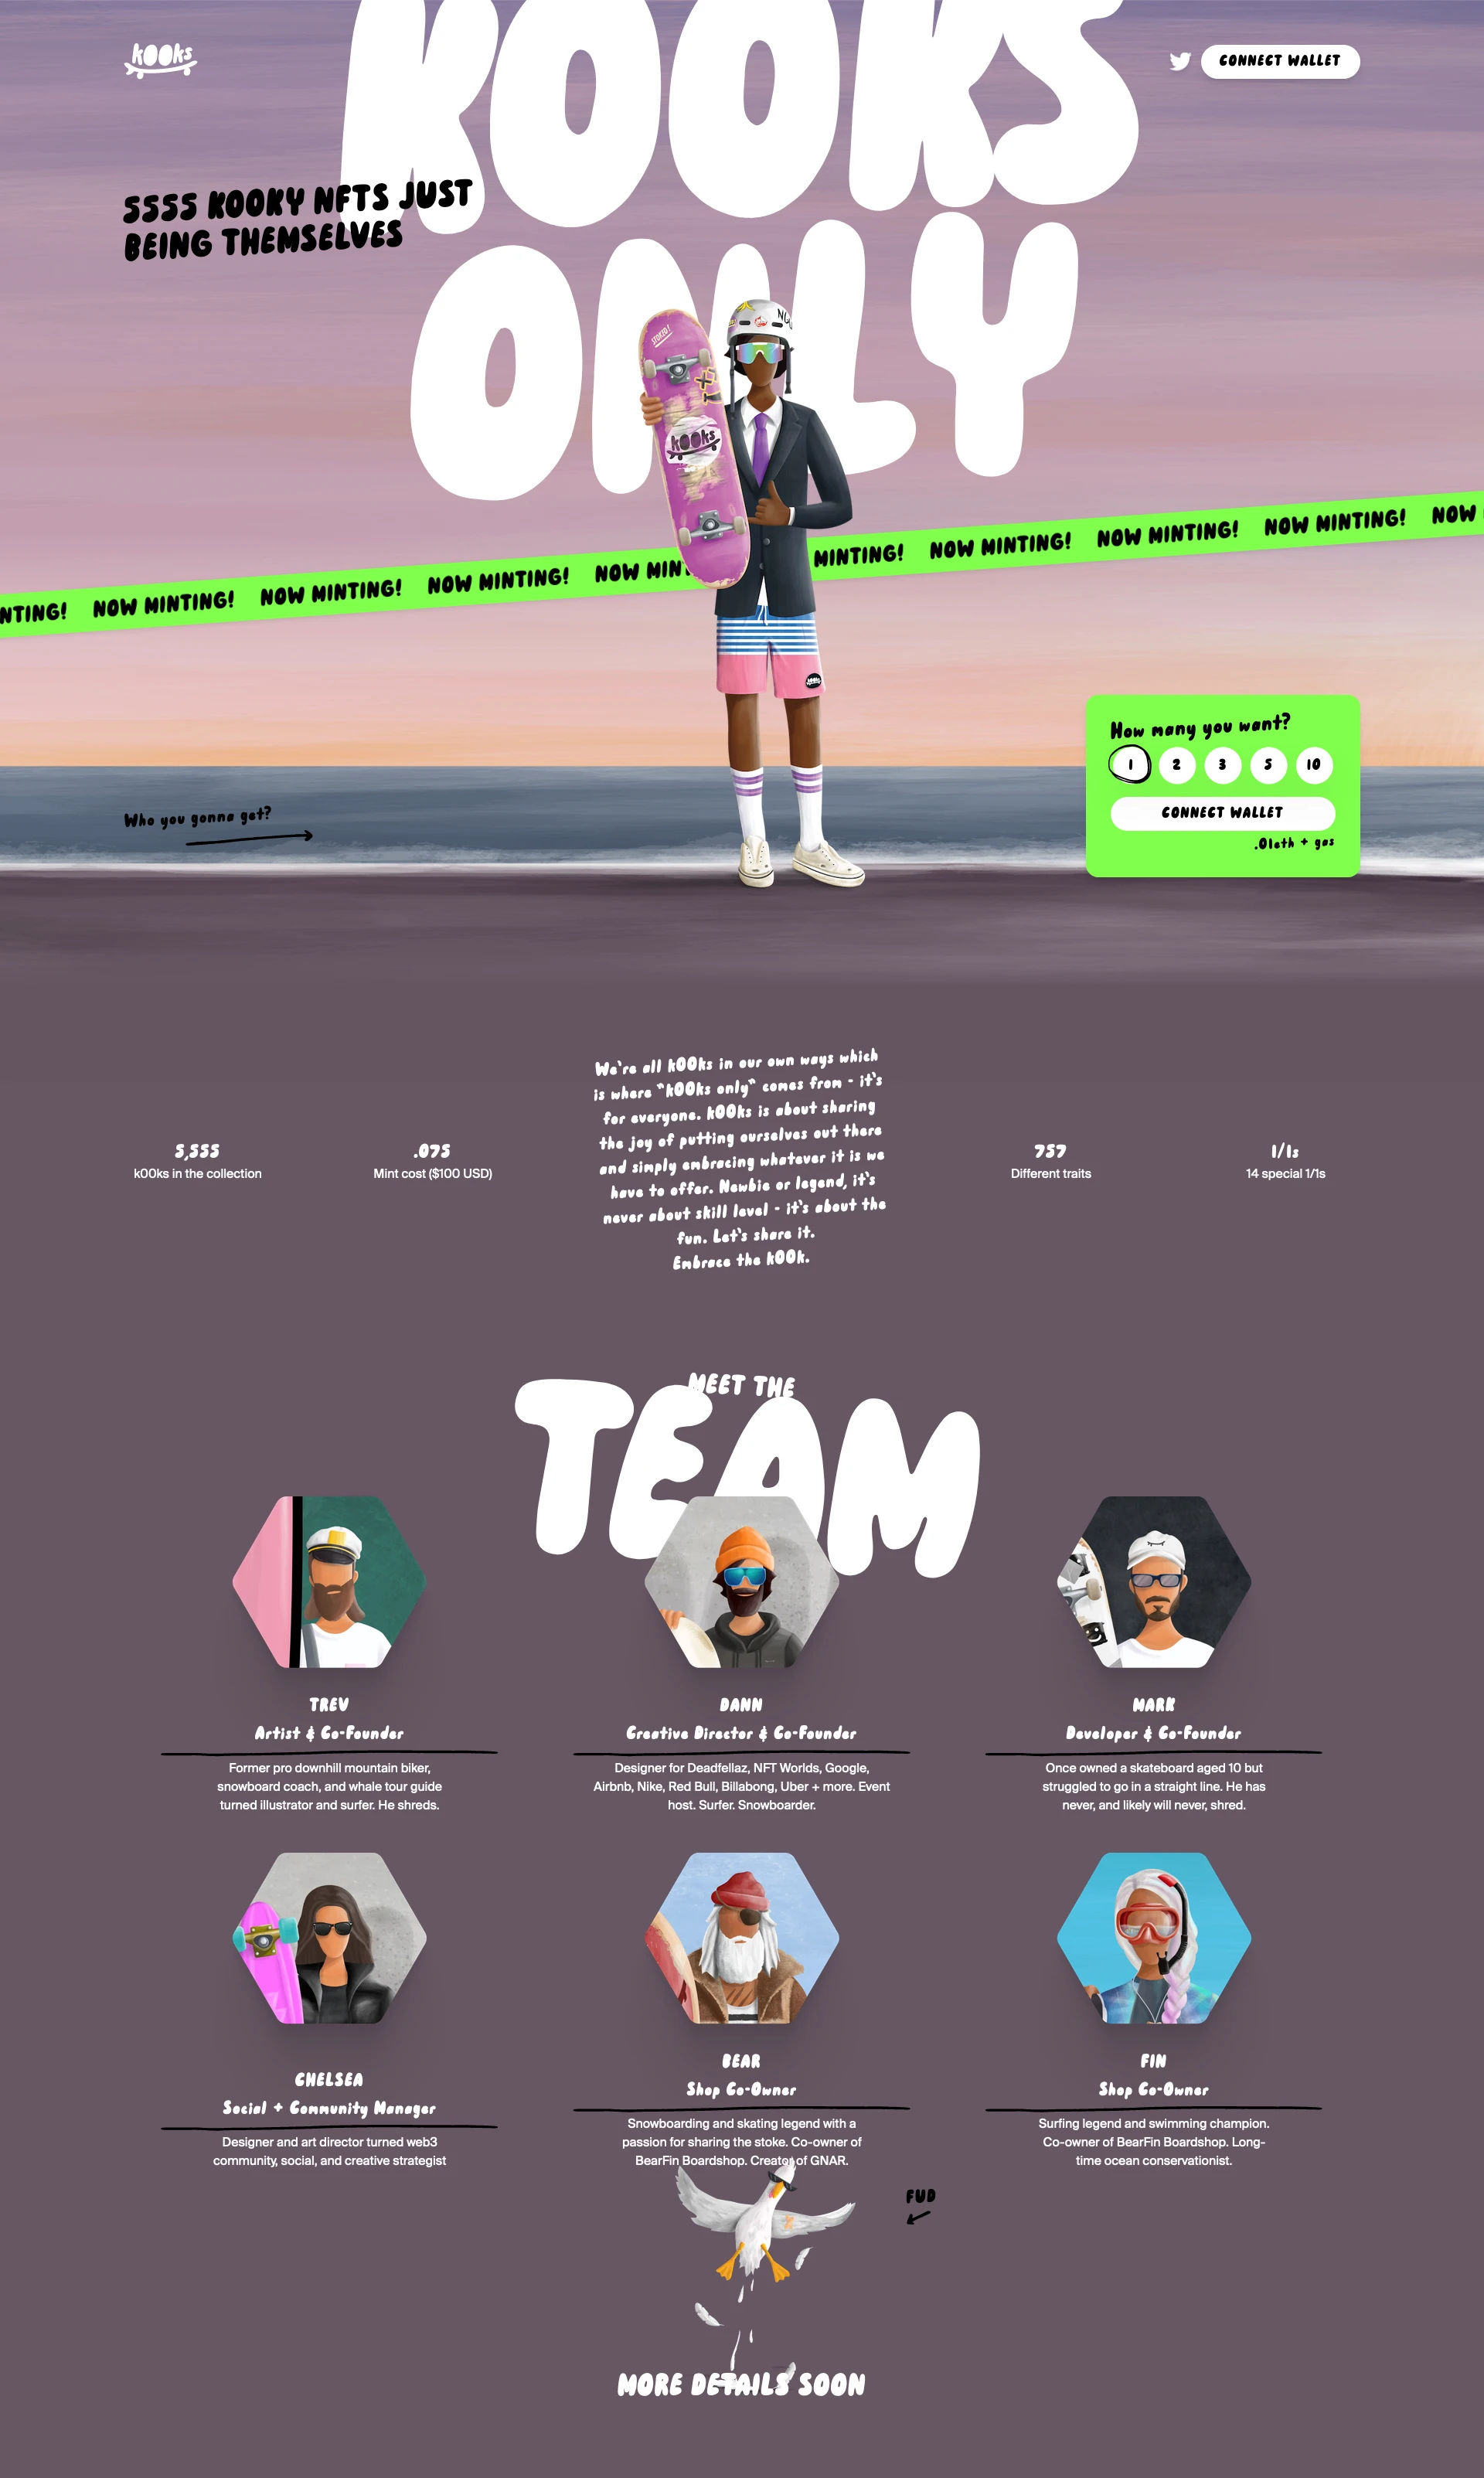 k00ks Landing Page Example: k00ks is about sharing the joy of putting ourselves out there and simply embracing whatever it is we have to offer. Newbie or legend, it’s never about skill level - it’s about the fun. Let’s share it. Embrace the k00k.